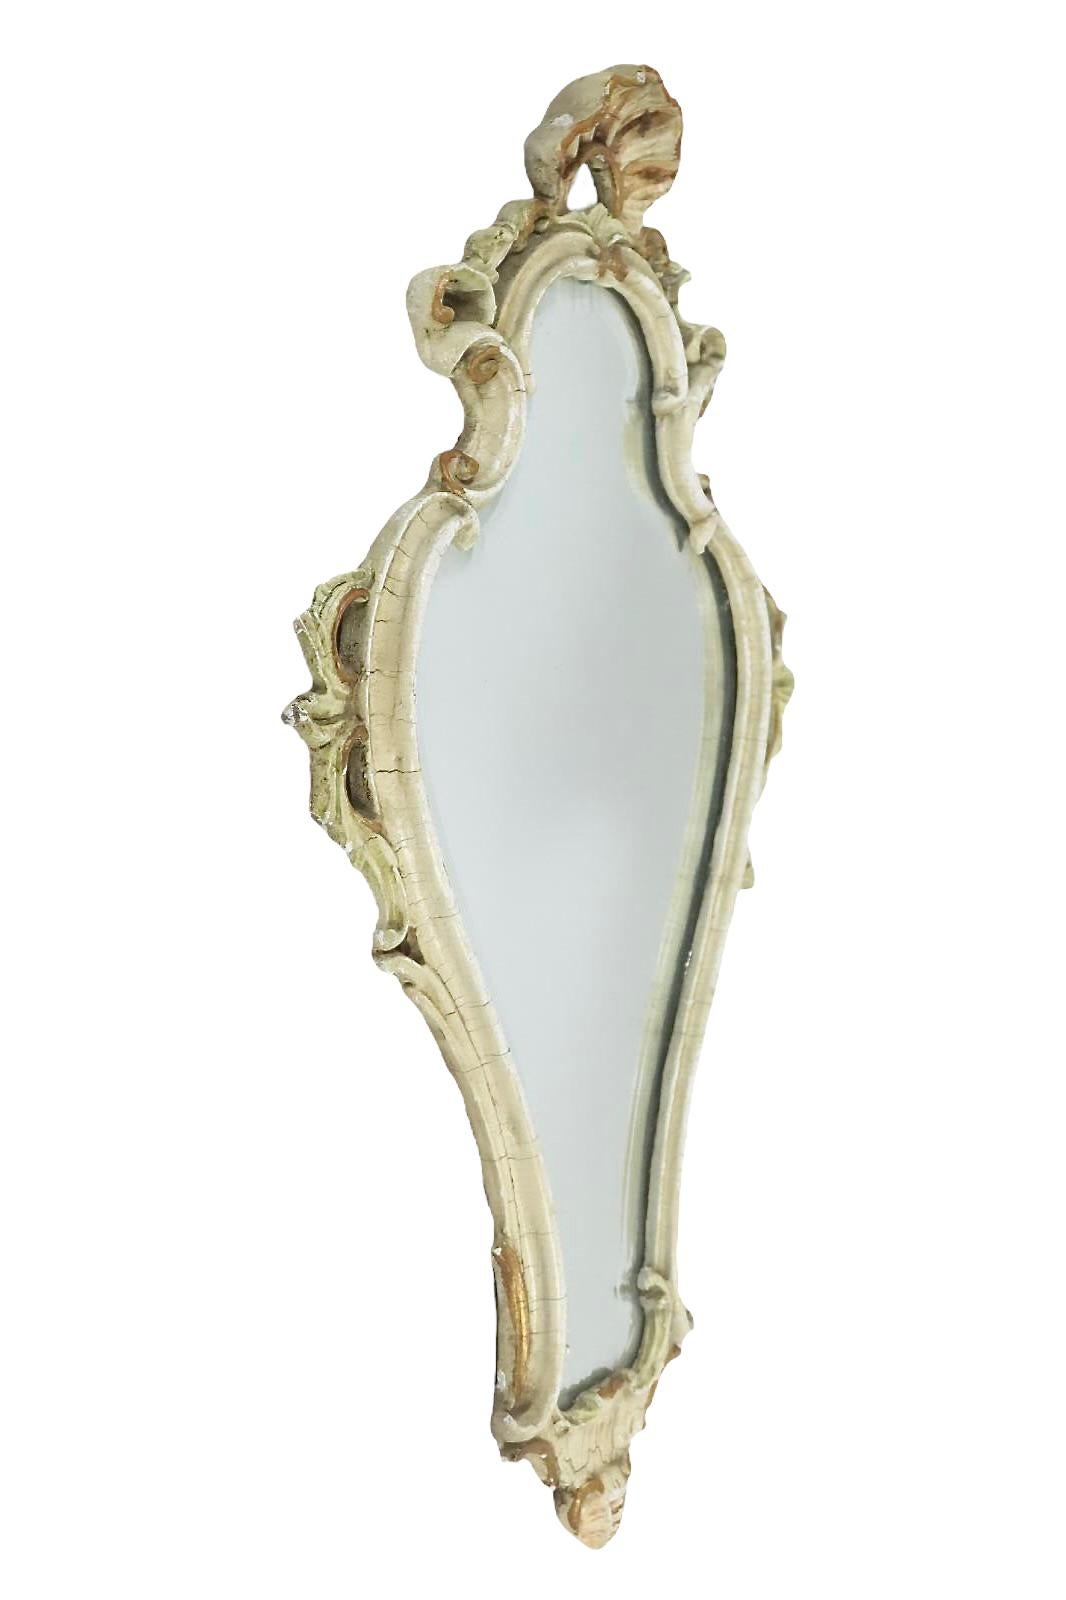 Beautiful Stunning Rococo Tole Toleware Mirror Vintage, Germany, 19th Century For Sale 9